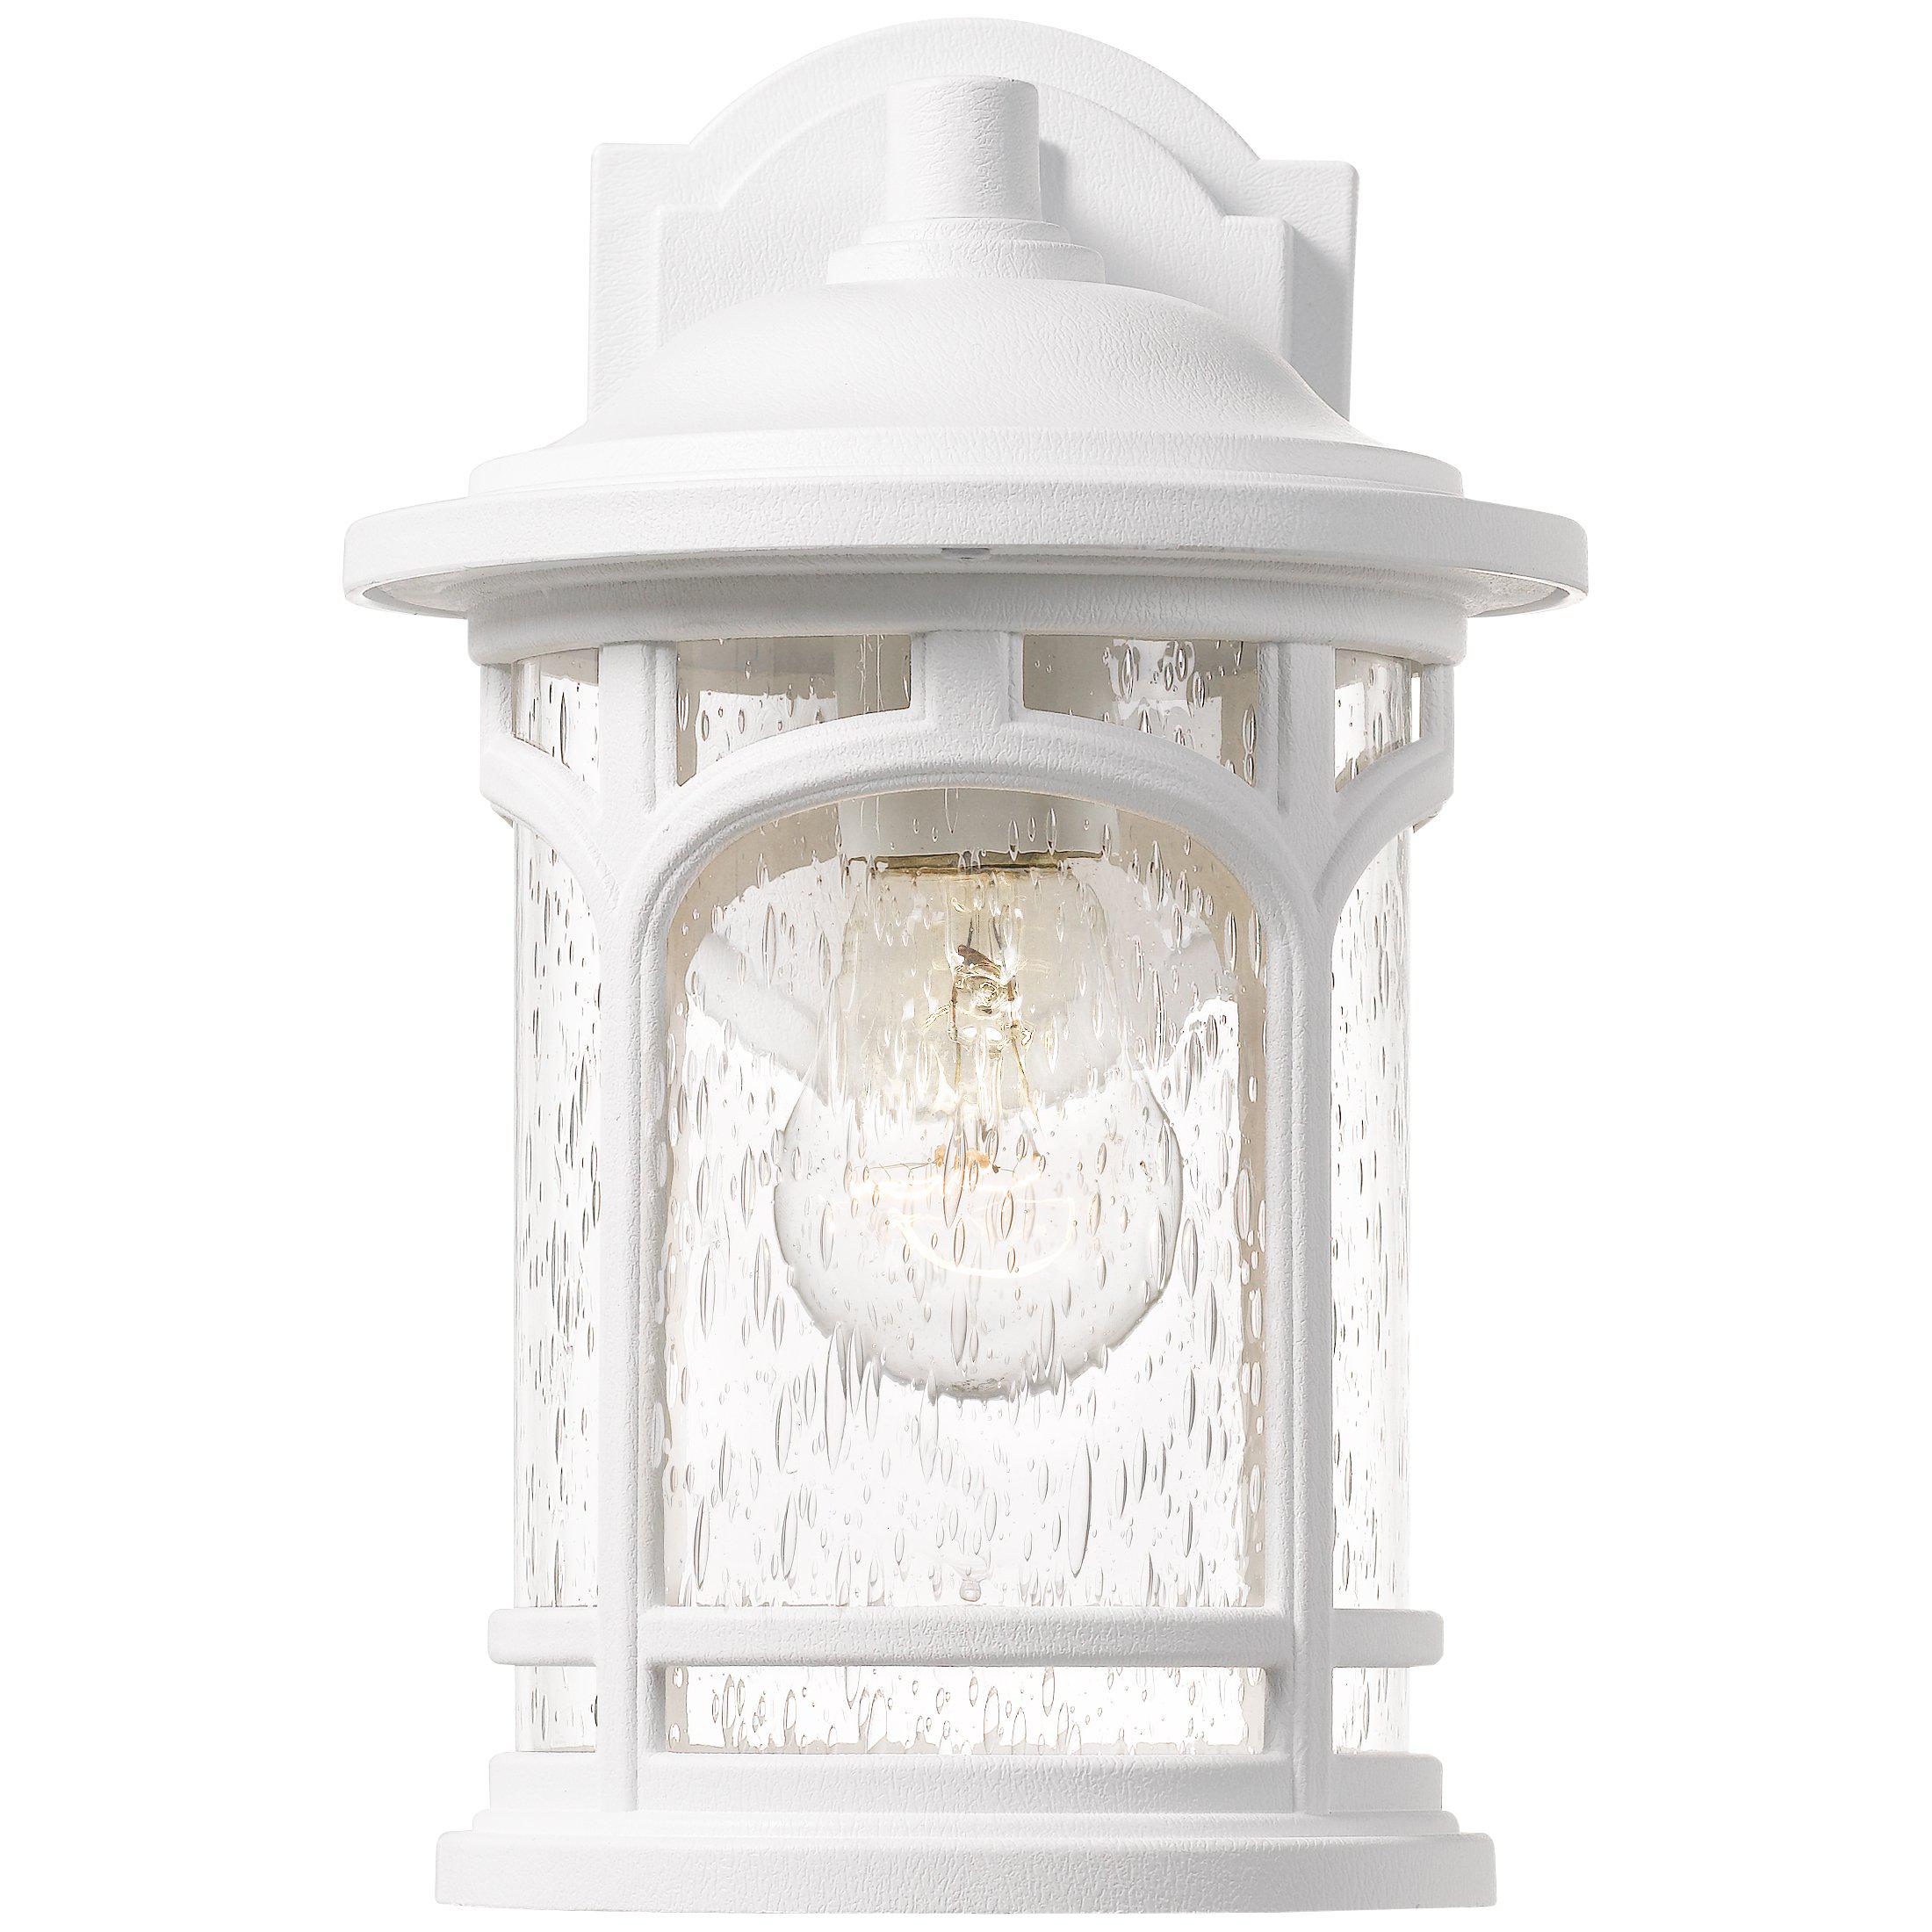 Quoizel  Marblehead Outdoor Lantern, Small Outdoor Light Fixture Quoizel   